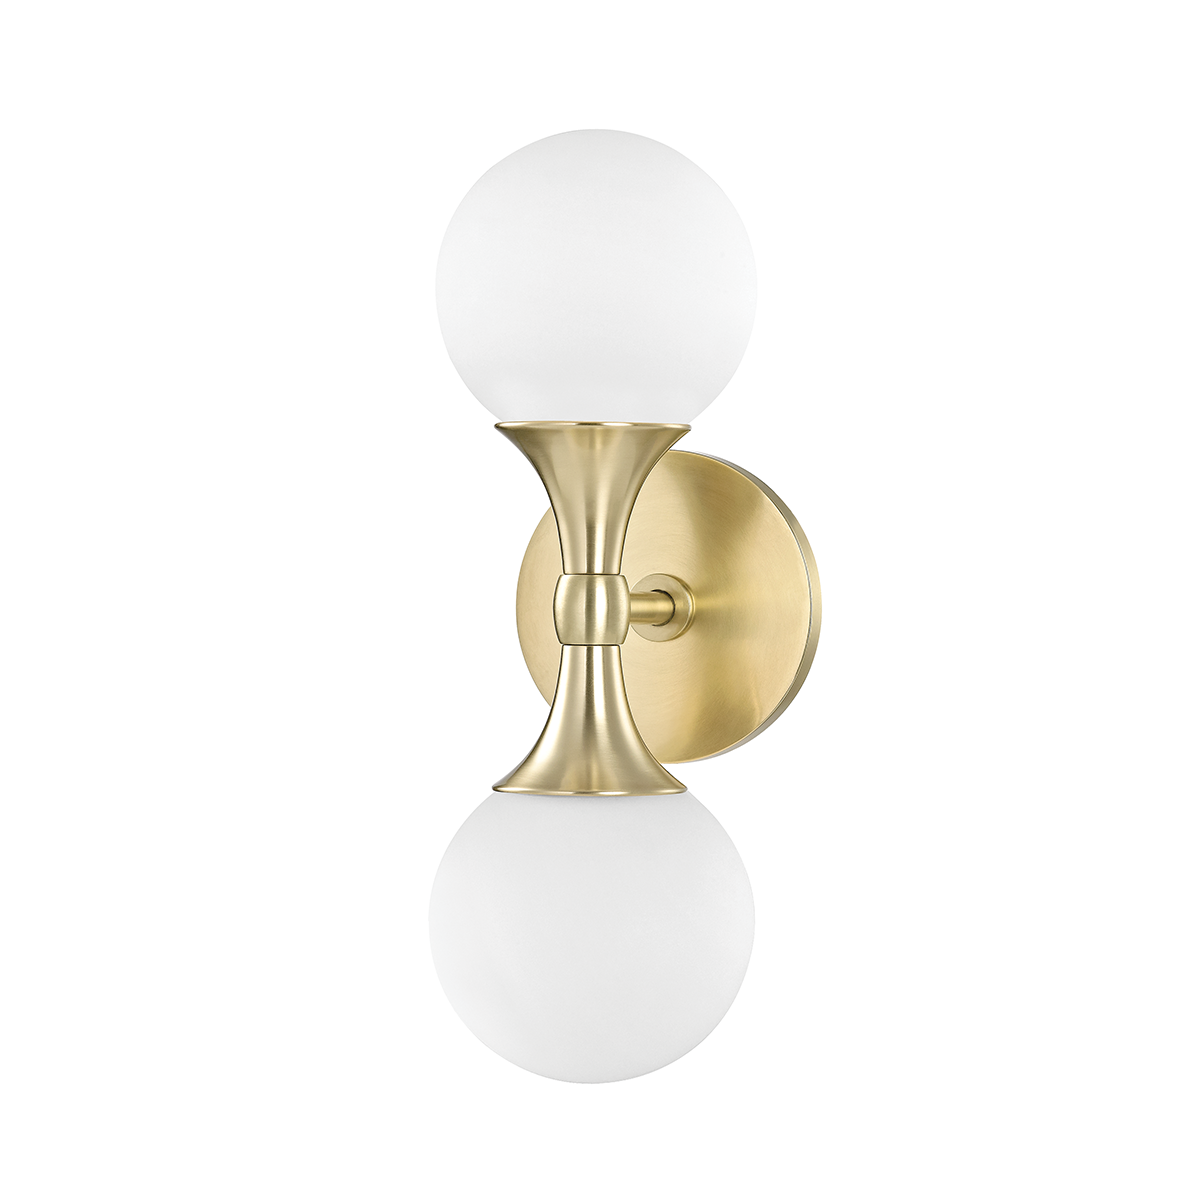 Astoria wall sconce